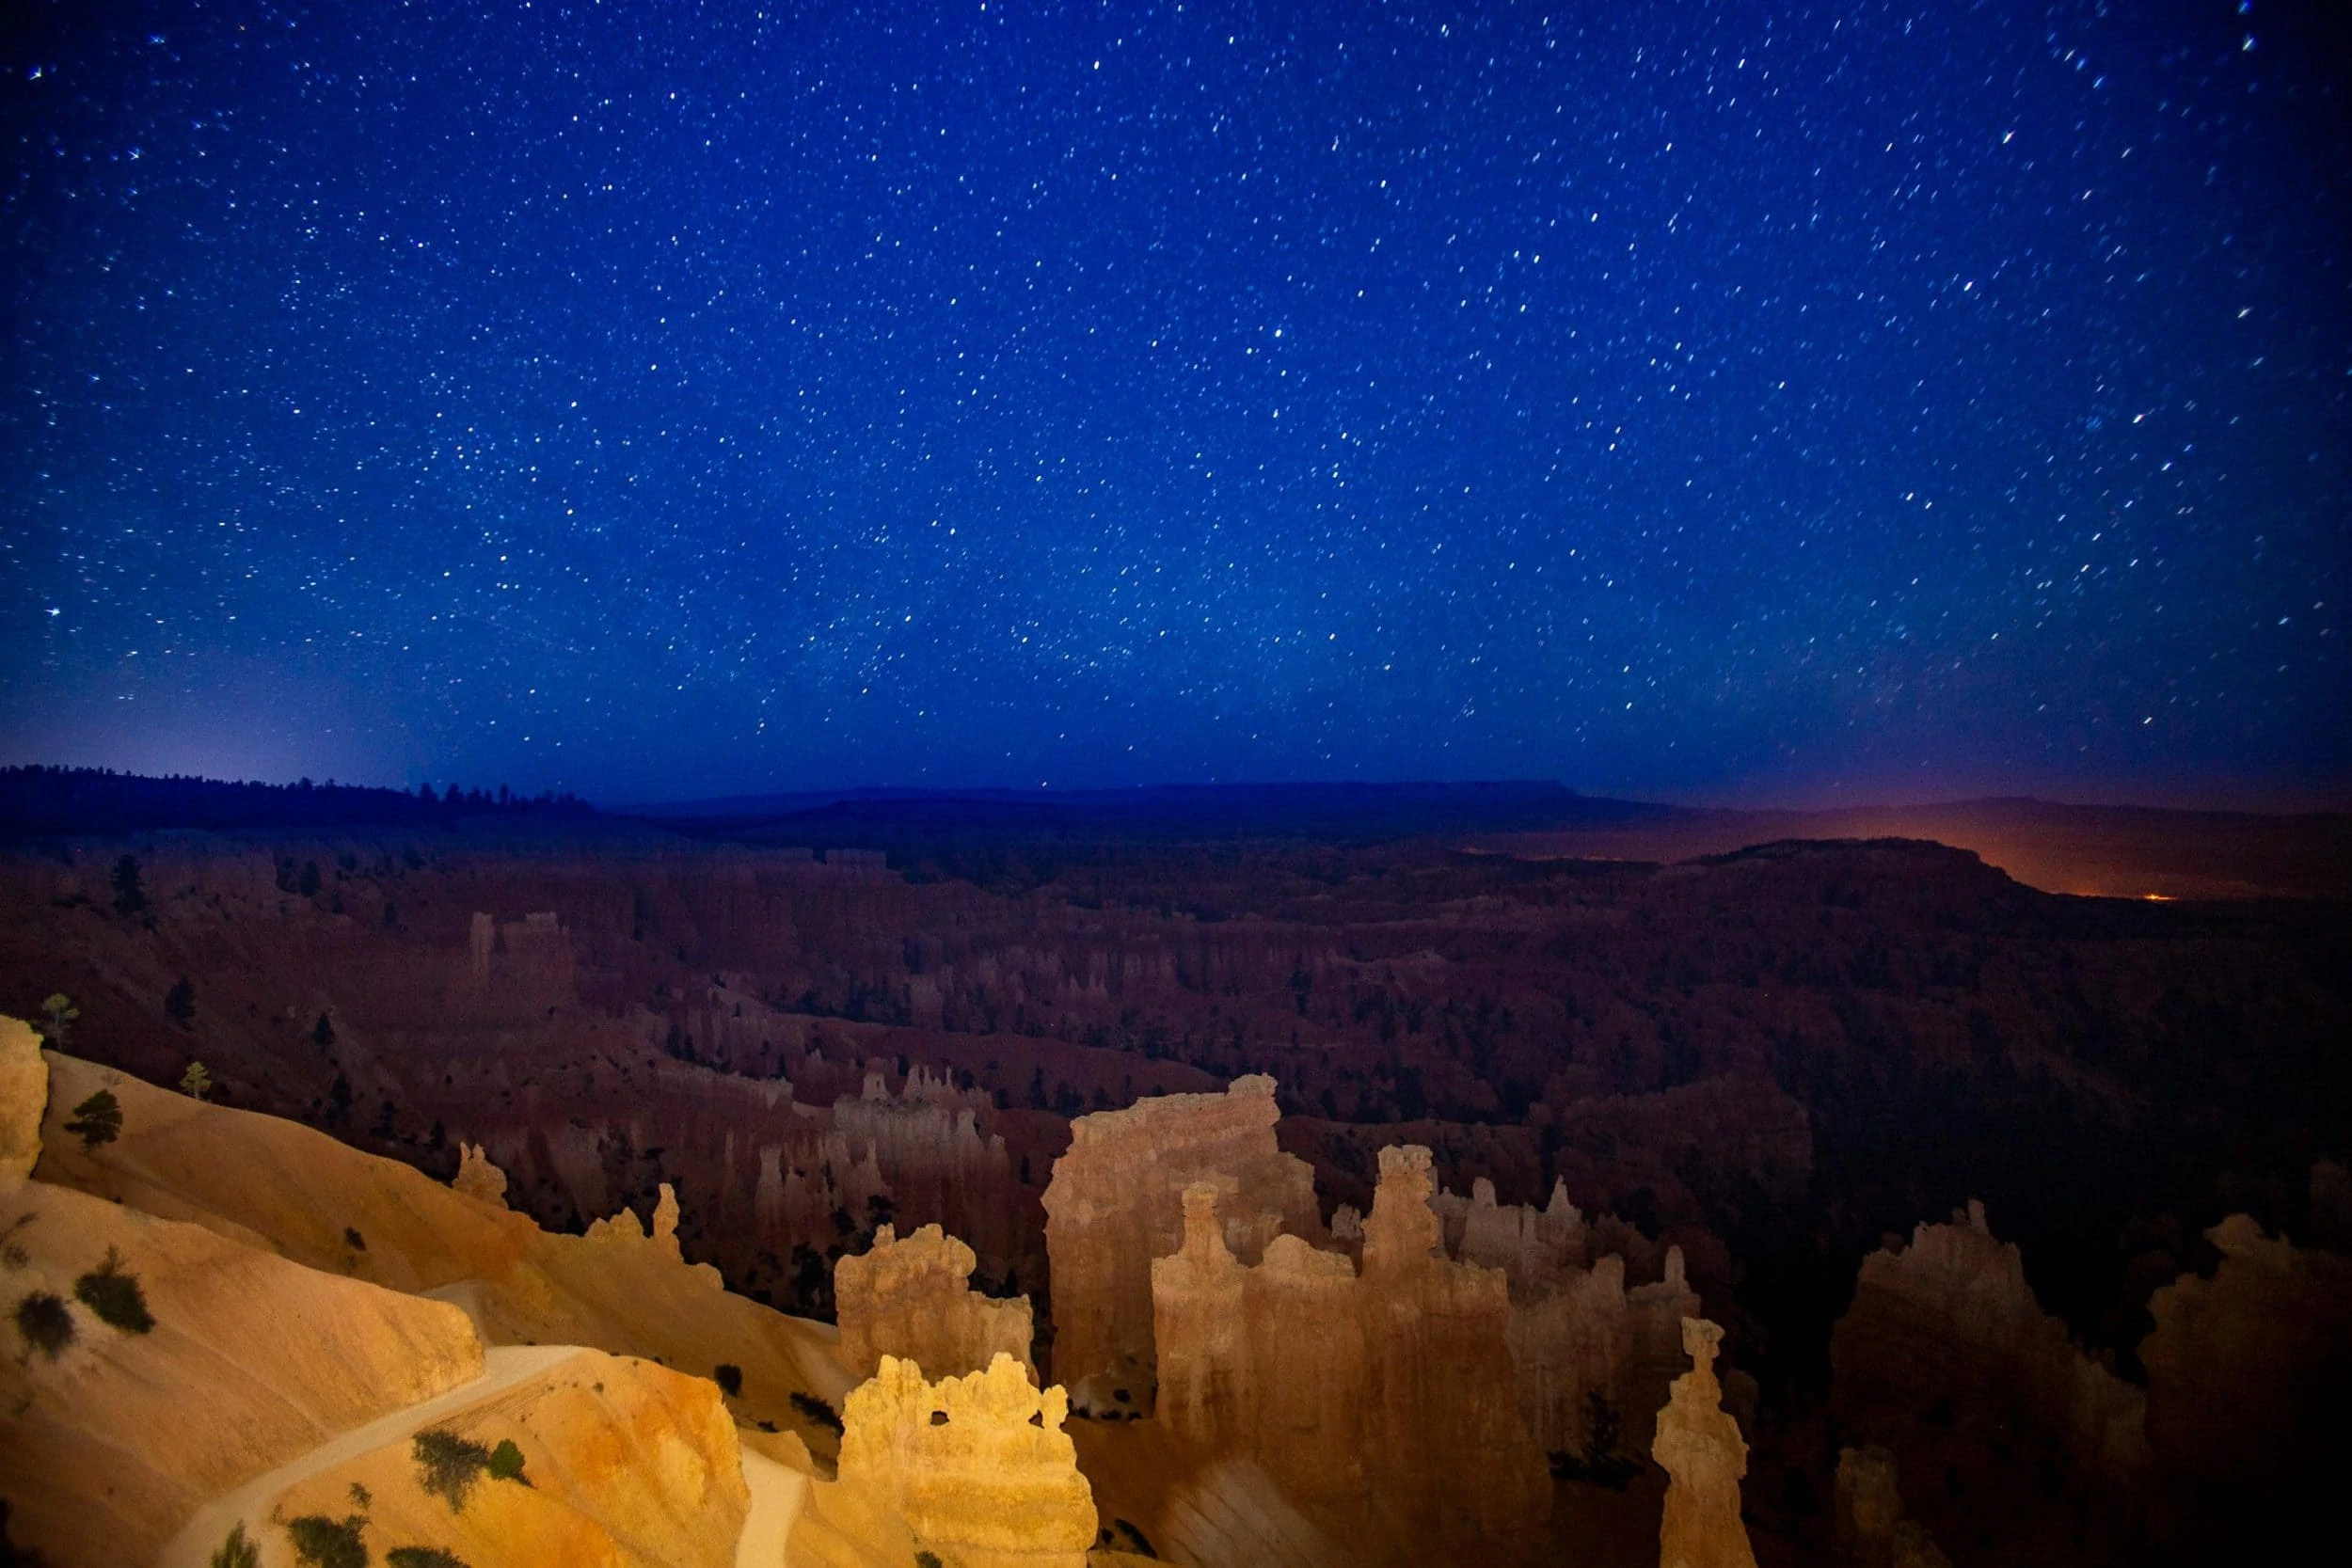 A night photo of the stars over Bryce Canyon's amphitheater location.